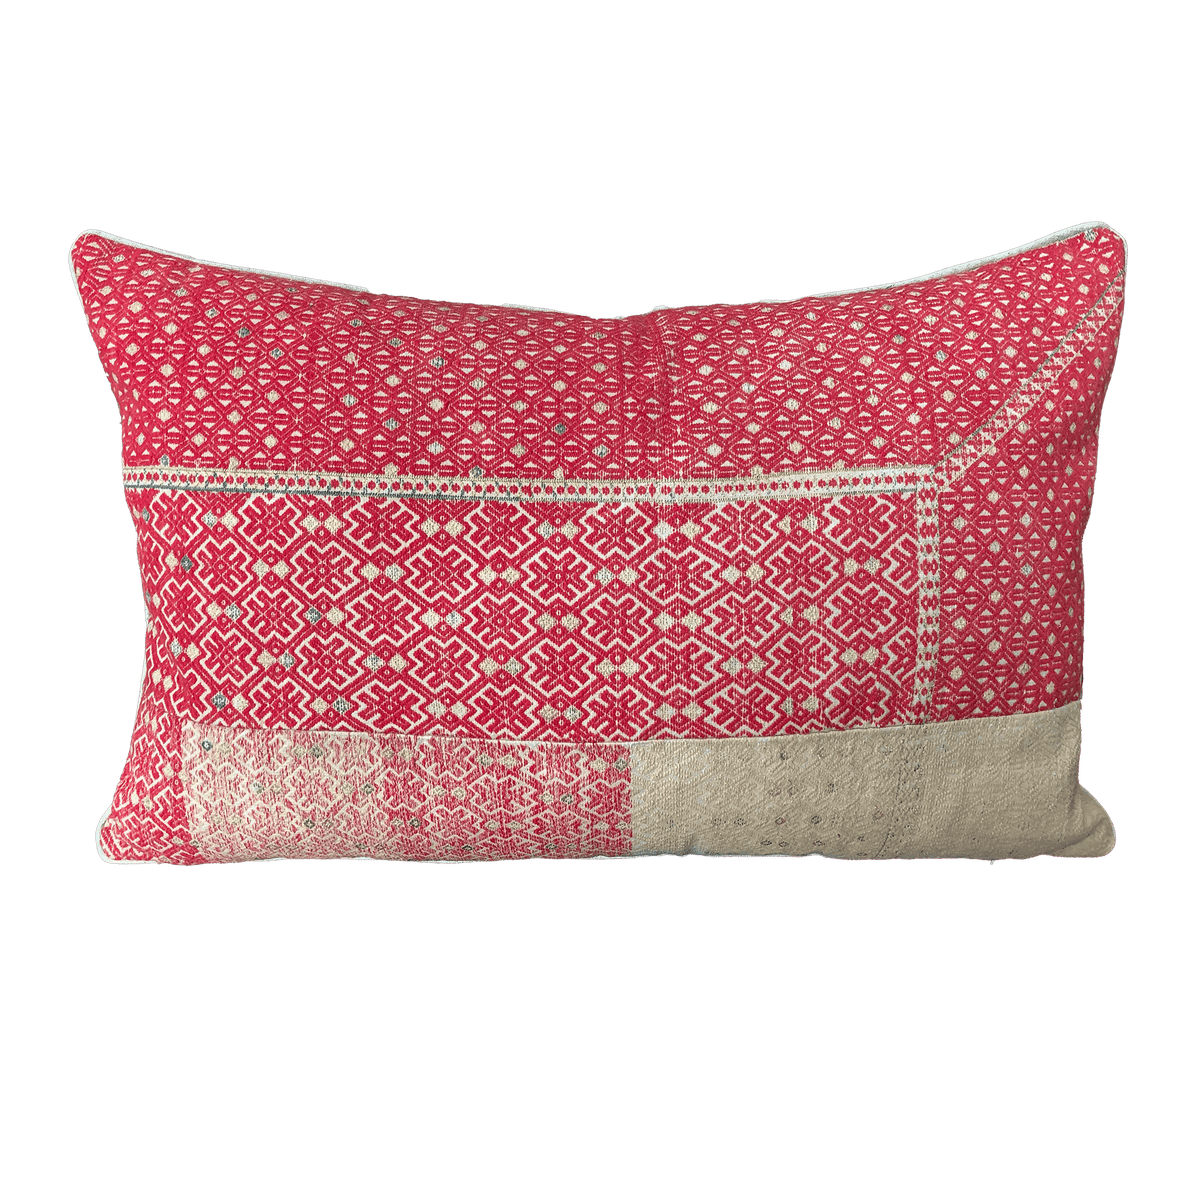 Coral Reef Pillow I